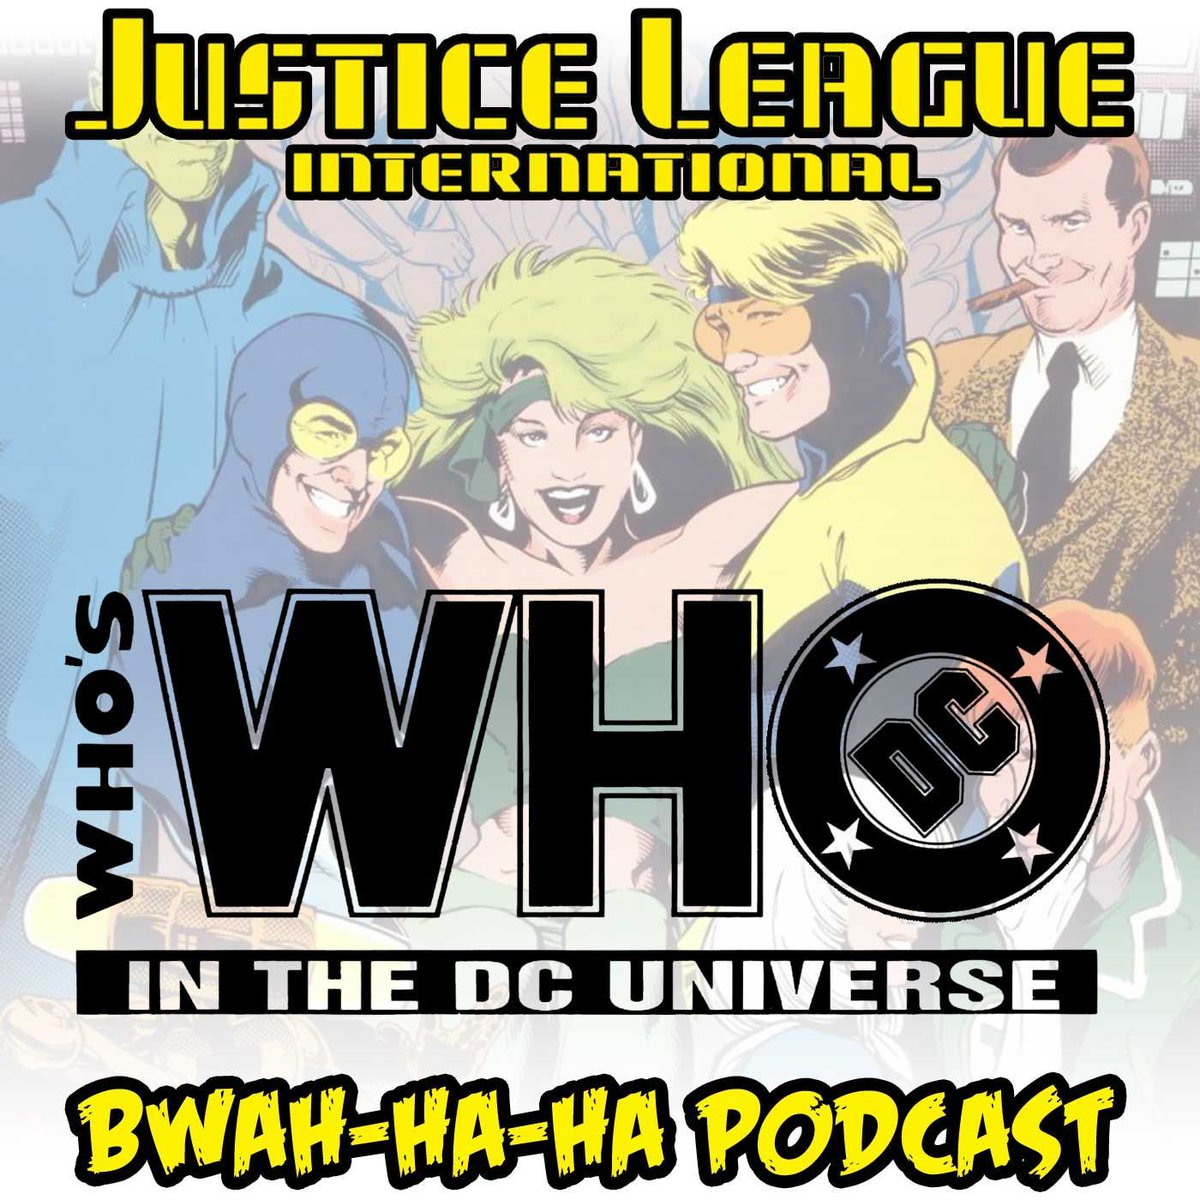 New episode covering JLI-related pages from WHO'S WHO IN THE DC UNIVERSE! We present clips from old episodes of WHO'S WHO PODCAST, covering 35 different JLI entries! Plus, we reveal a brand new custom loose leaf WHO'S WHO page for JUSTICE LEAUGE EUROPE! fireandwaterpodcast.com/show/jlipodcas…